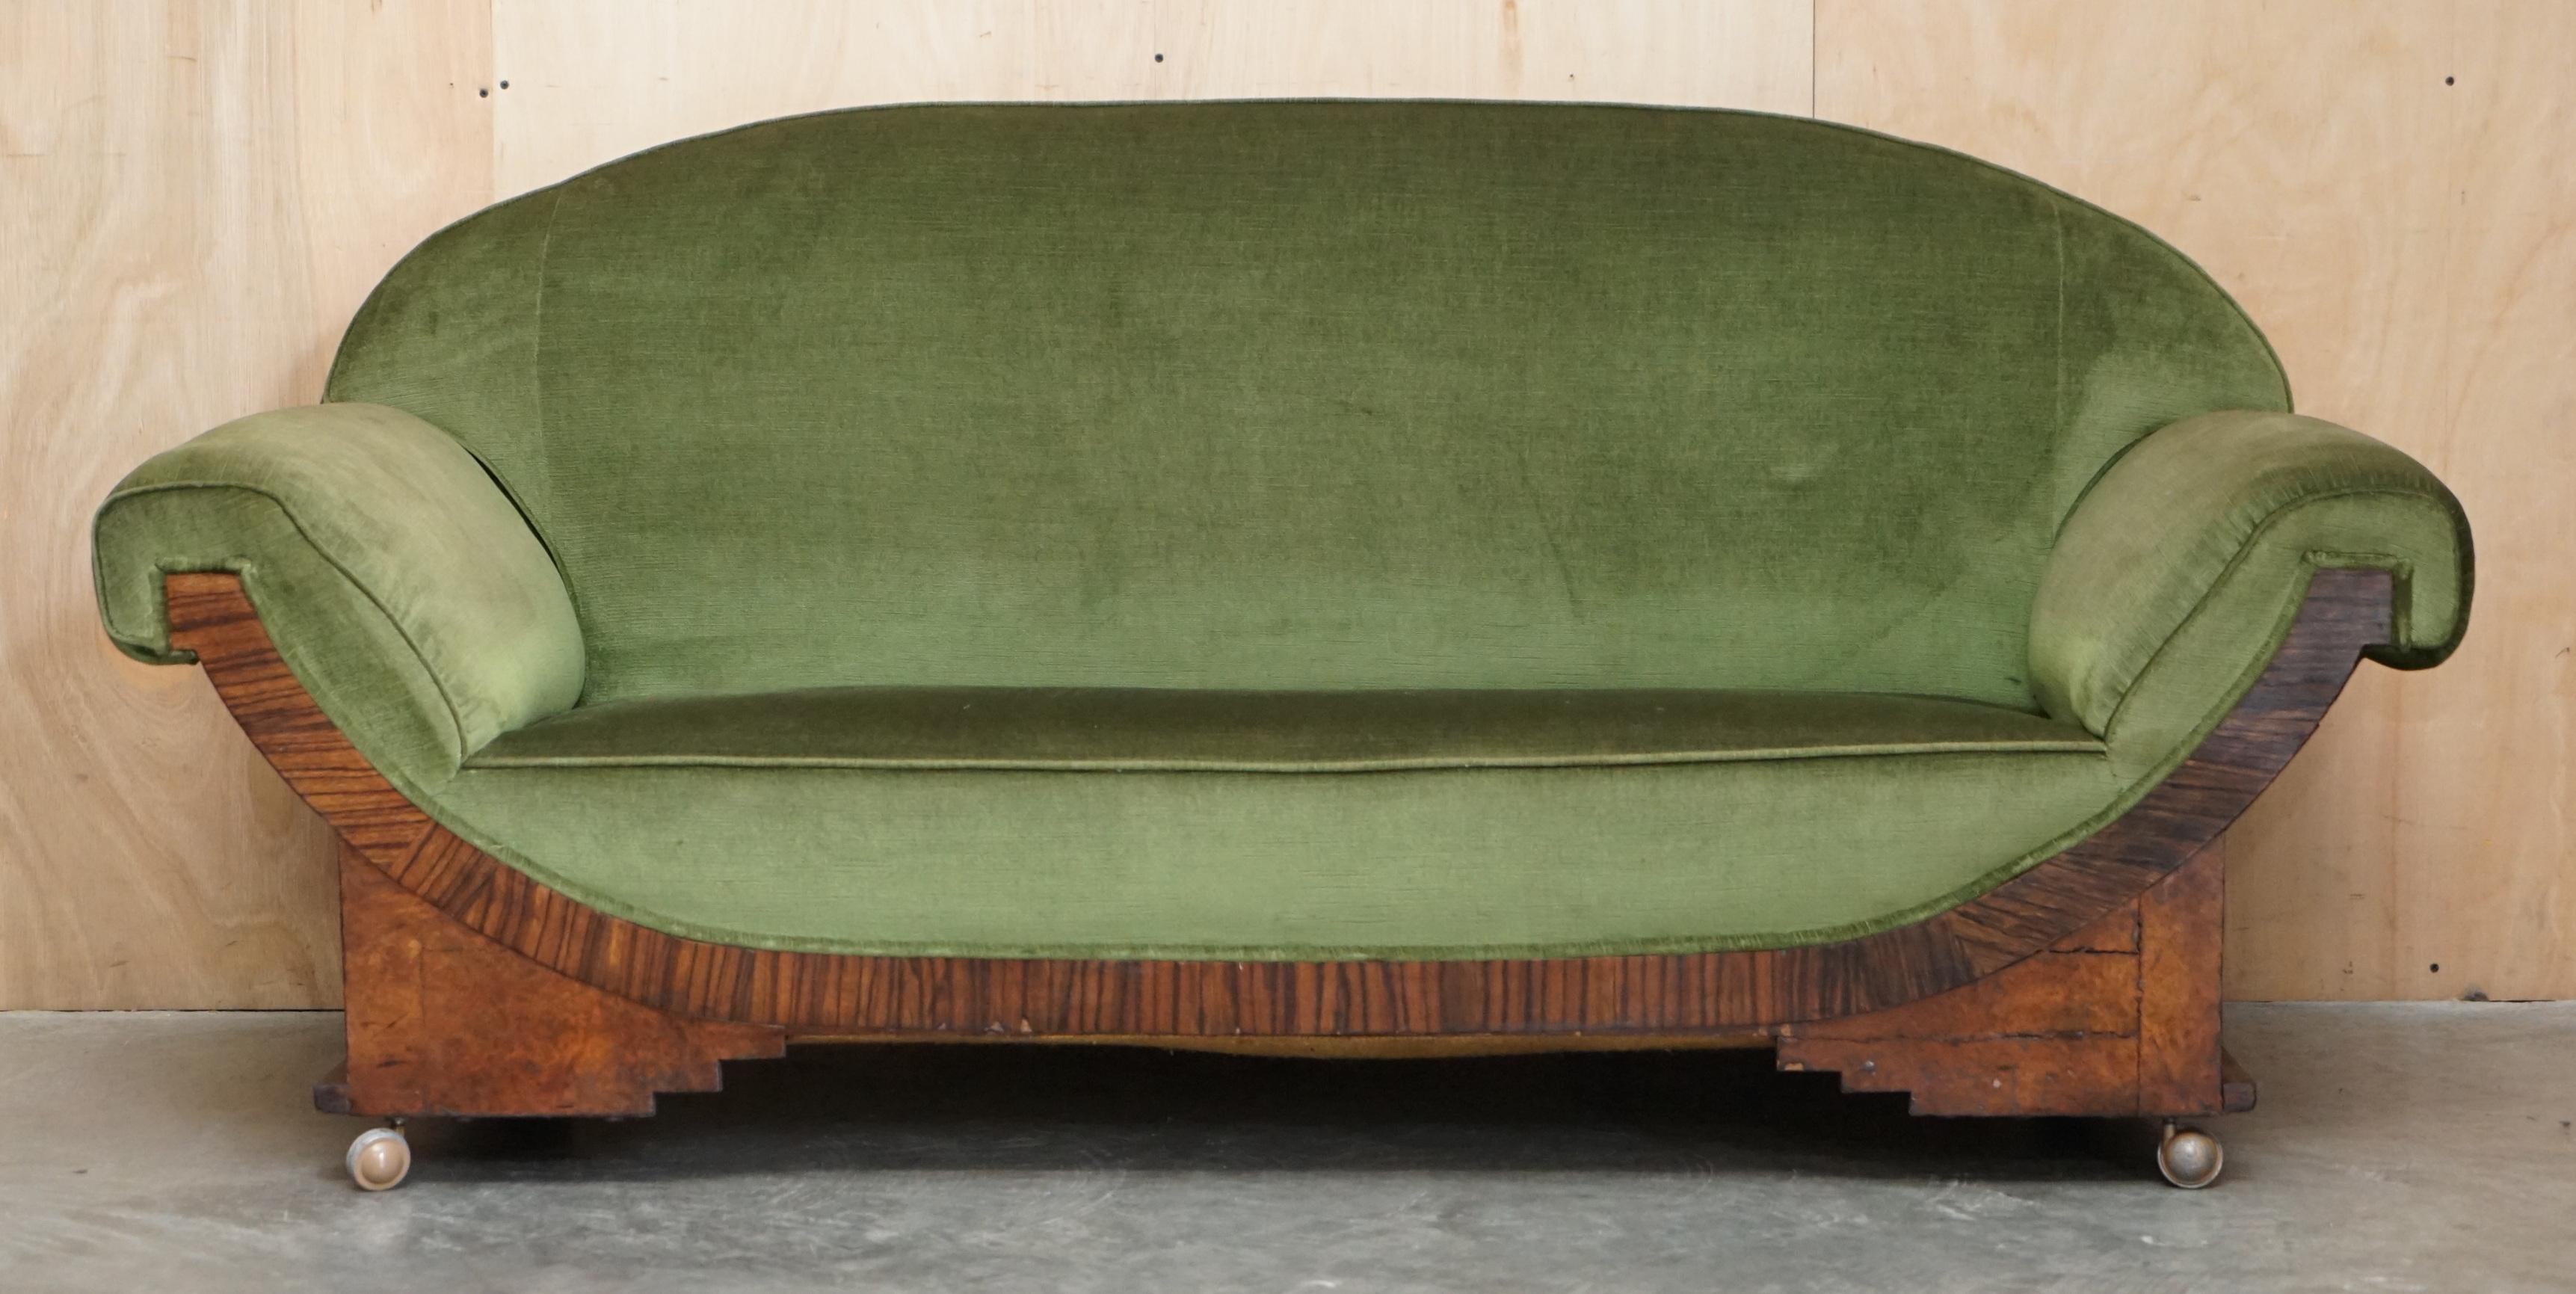 Royal House Antiques

Royal House Antiques is delighted to offer for sale this exquisite circa 1920’s Art Deco Burr Walnut framed sofa with Green Velour upholstery that is part of a suite

Please note the delivery fee listed is just a guide, it